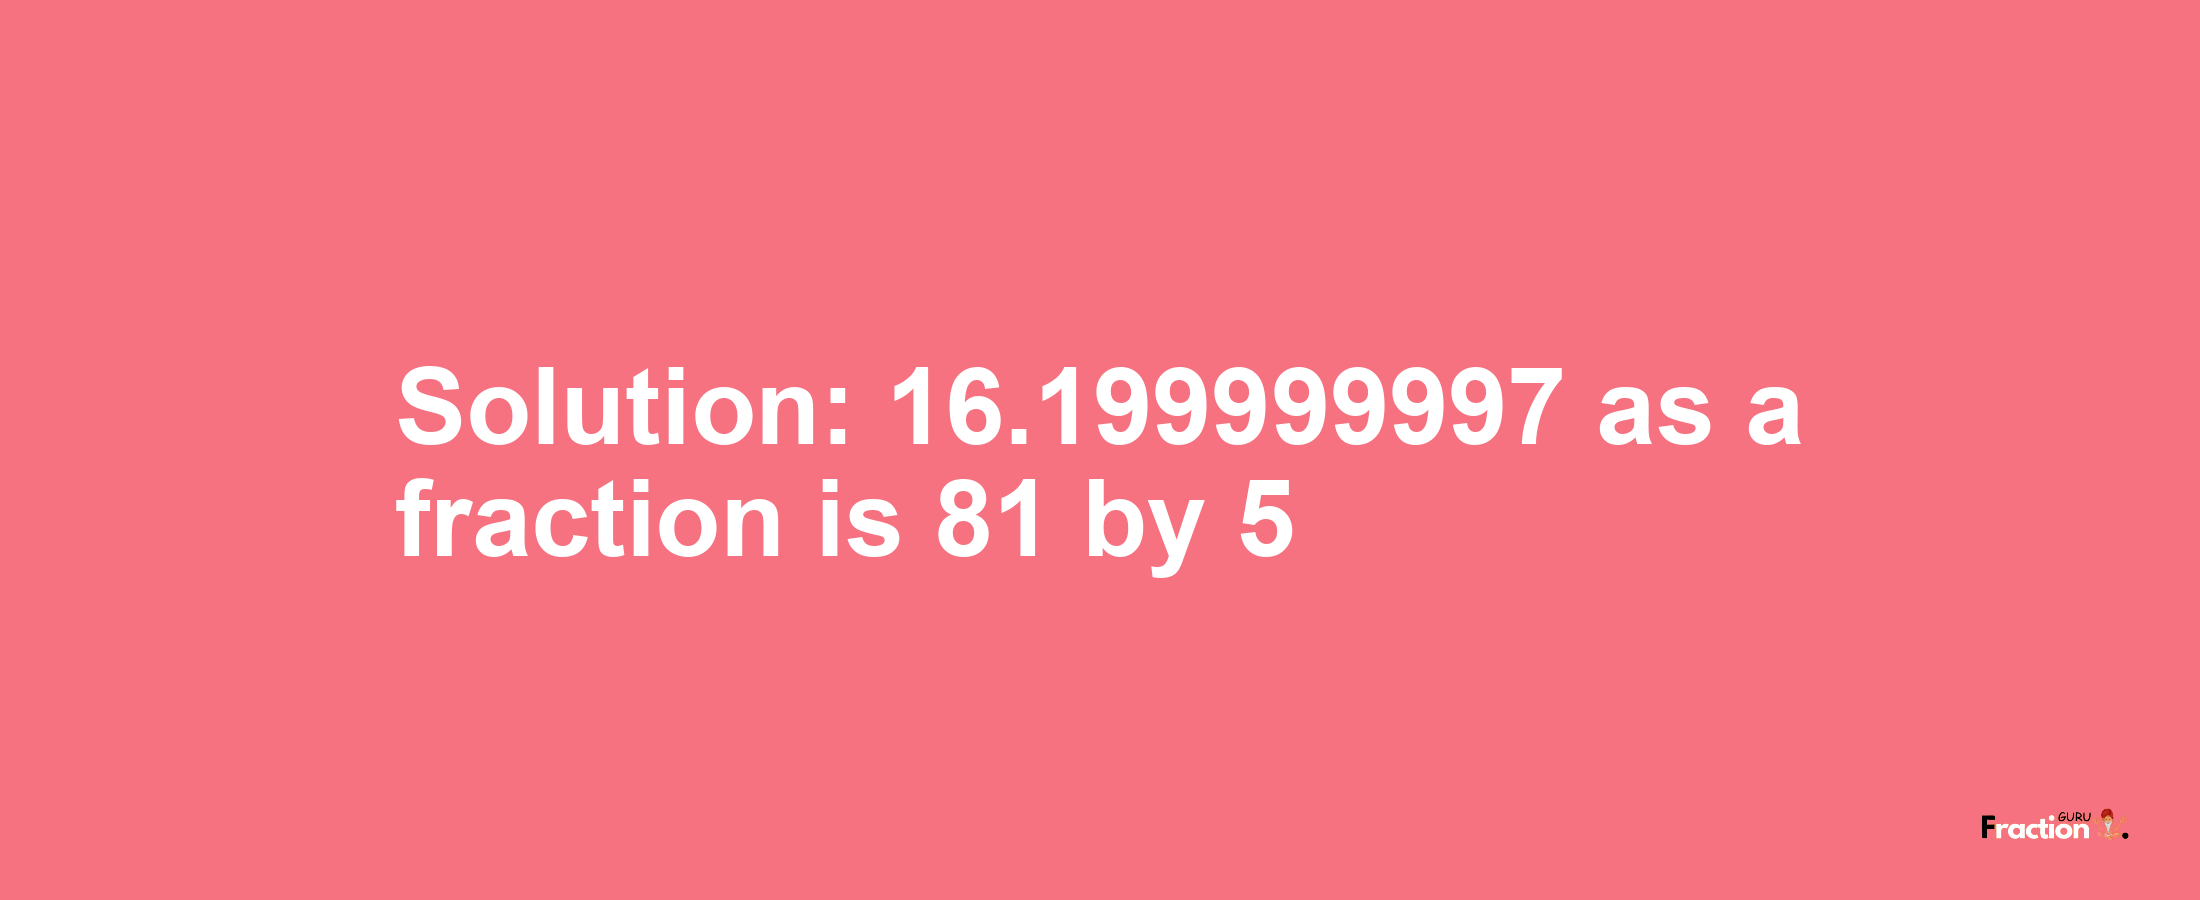 Solution:16.199999997 as a fraction is 81/5